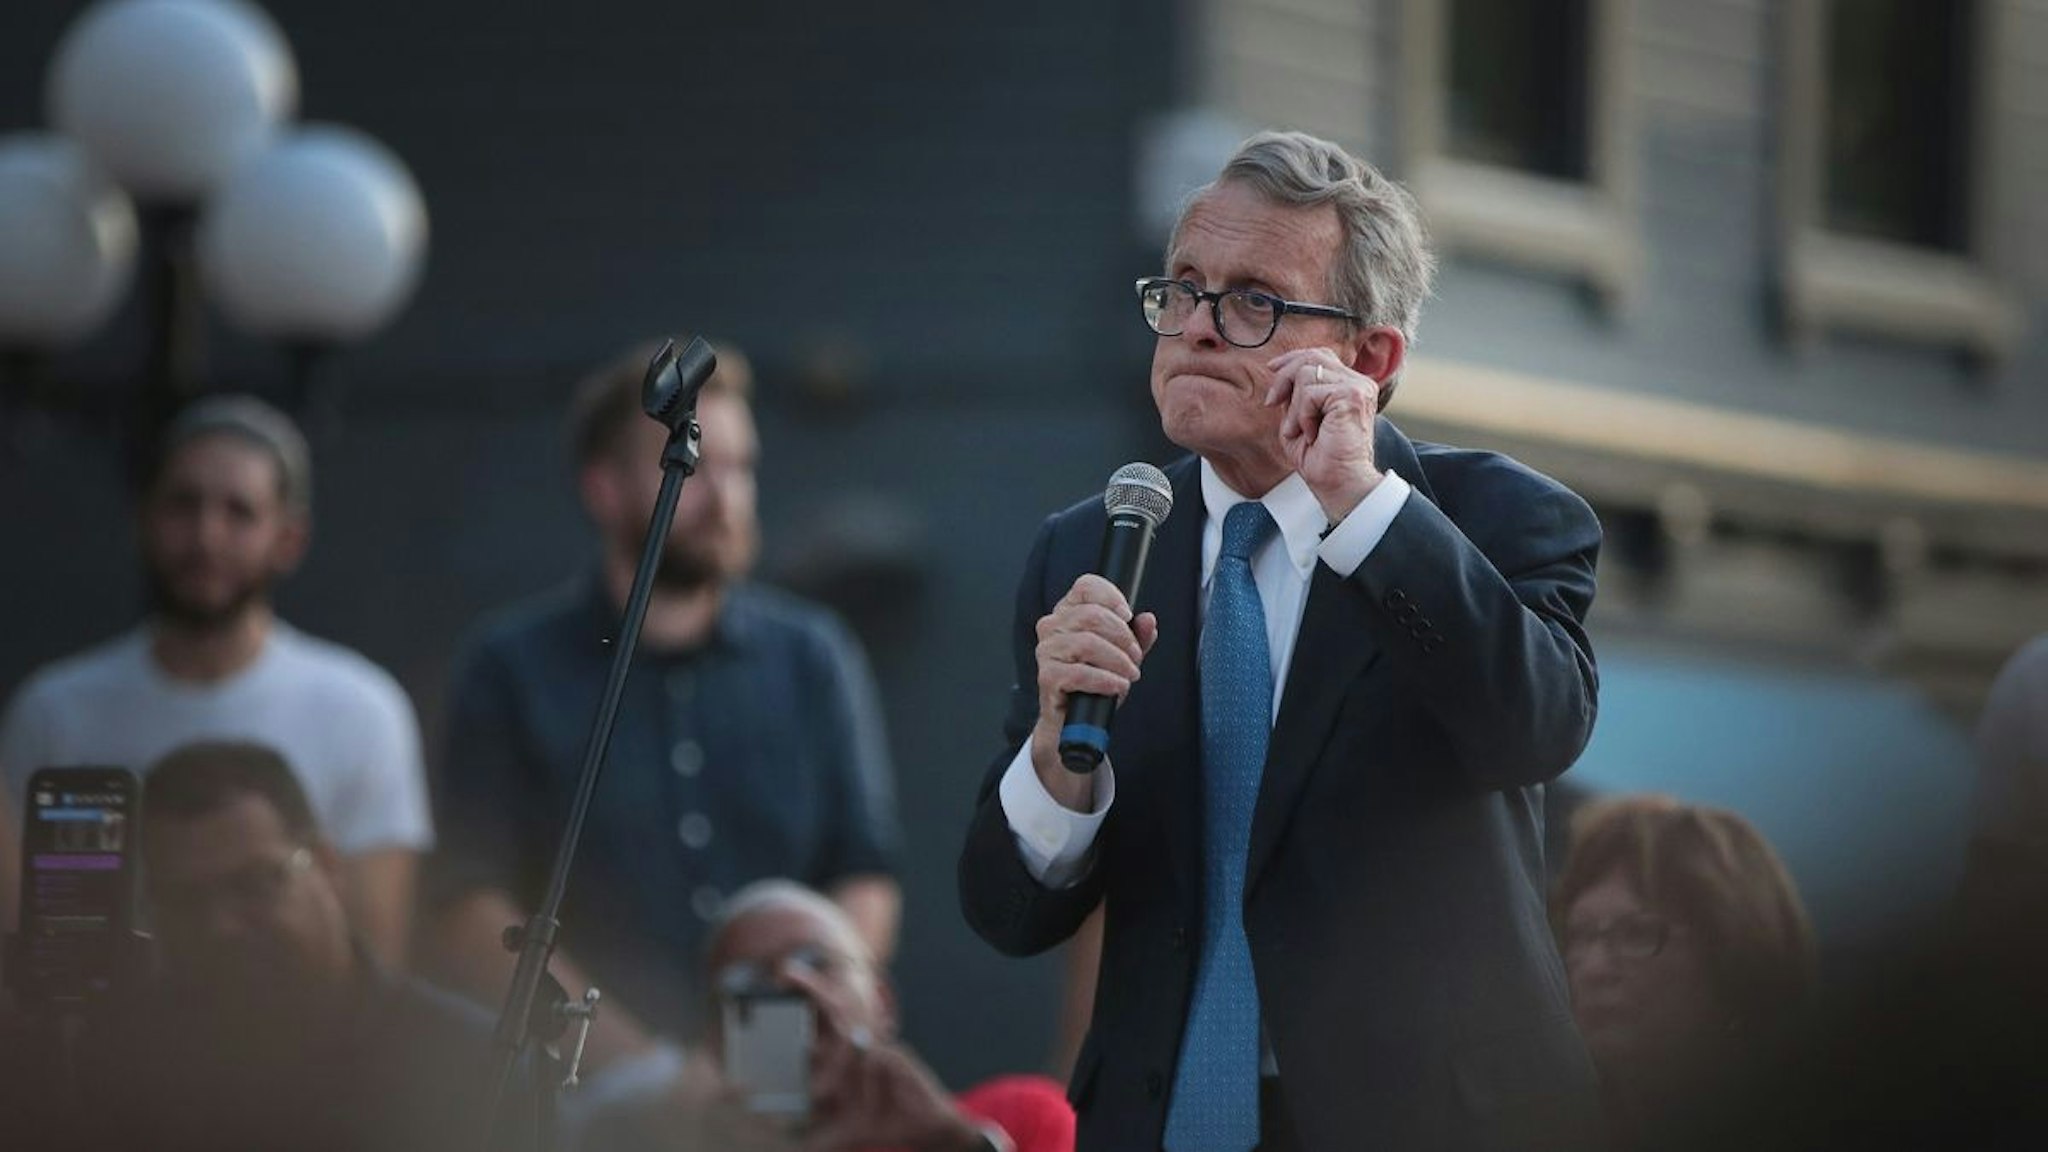 Ohio Governor Mike DeWine speaks to mourners at a memorial service in the Oregon District held to recognize the victims of an early-morning mass shooting in the popular nightspot on August 04, 2019 in Dayton, Ohio.